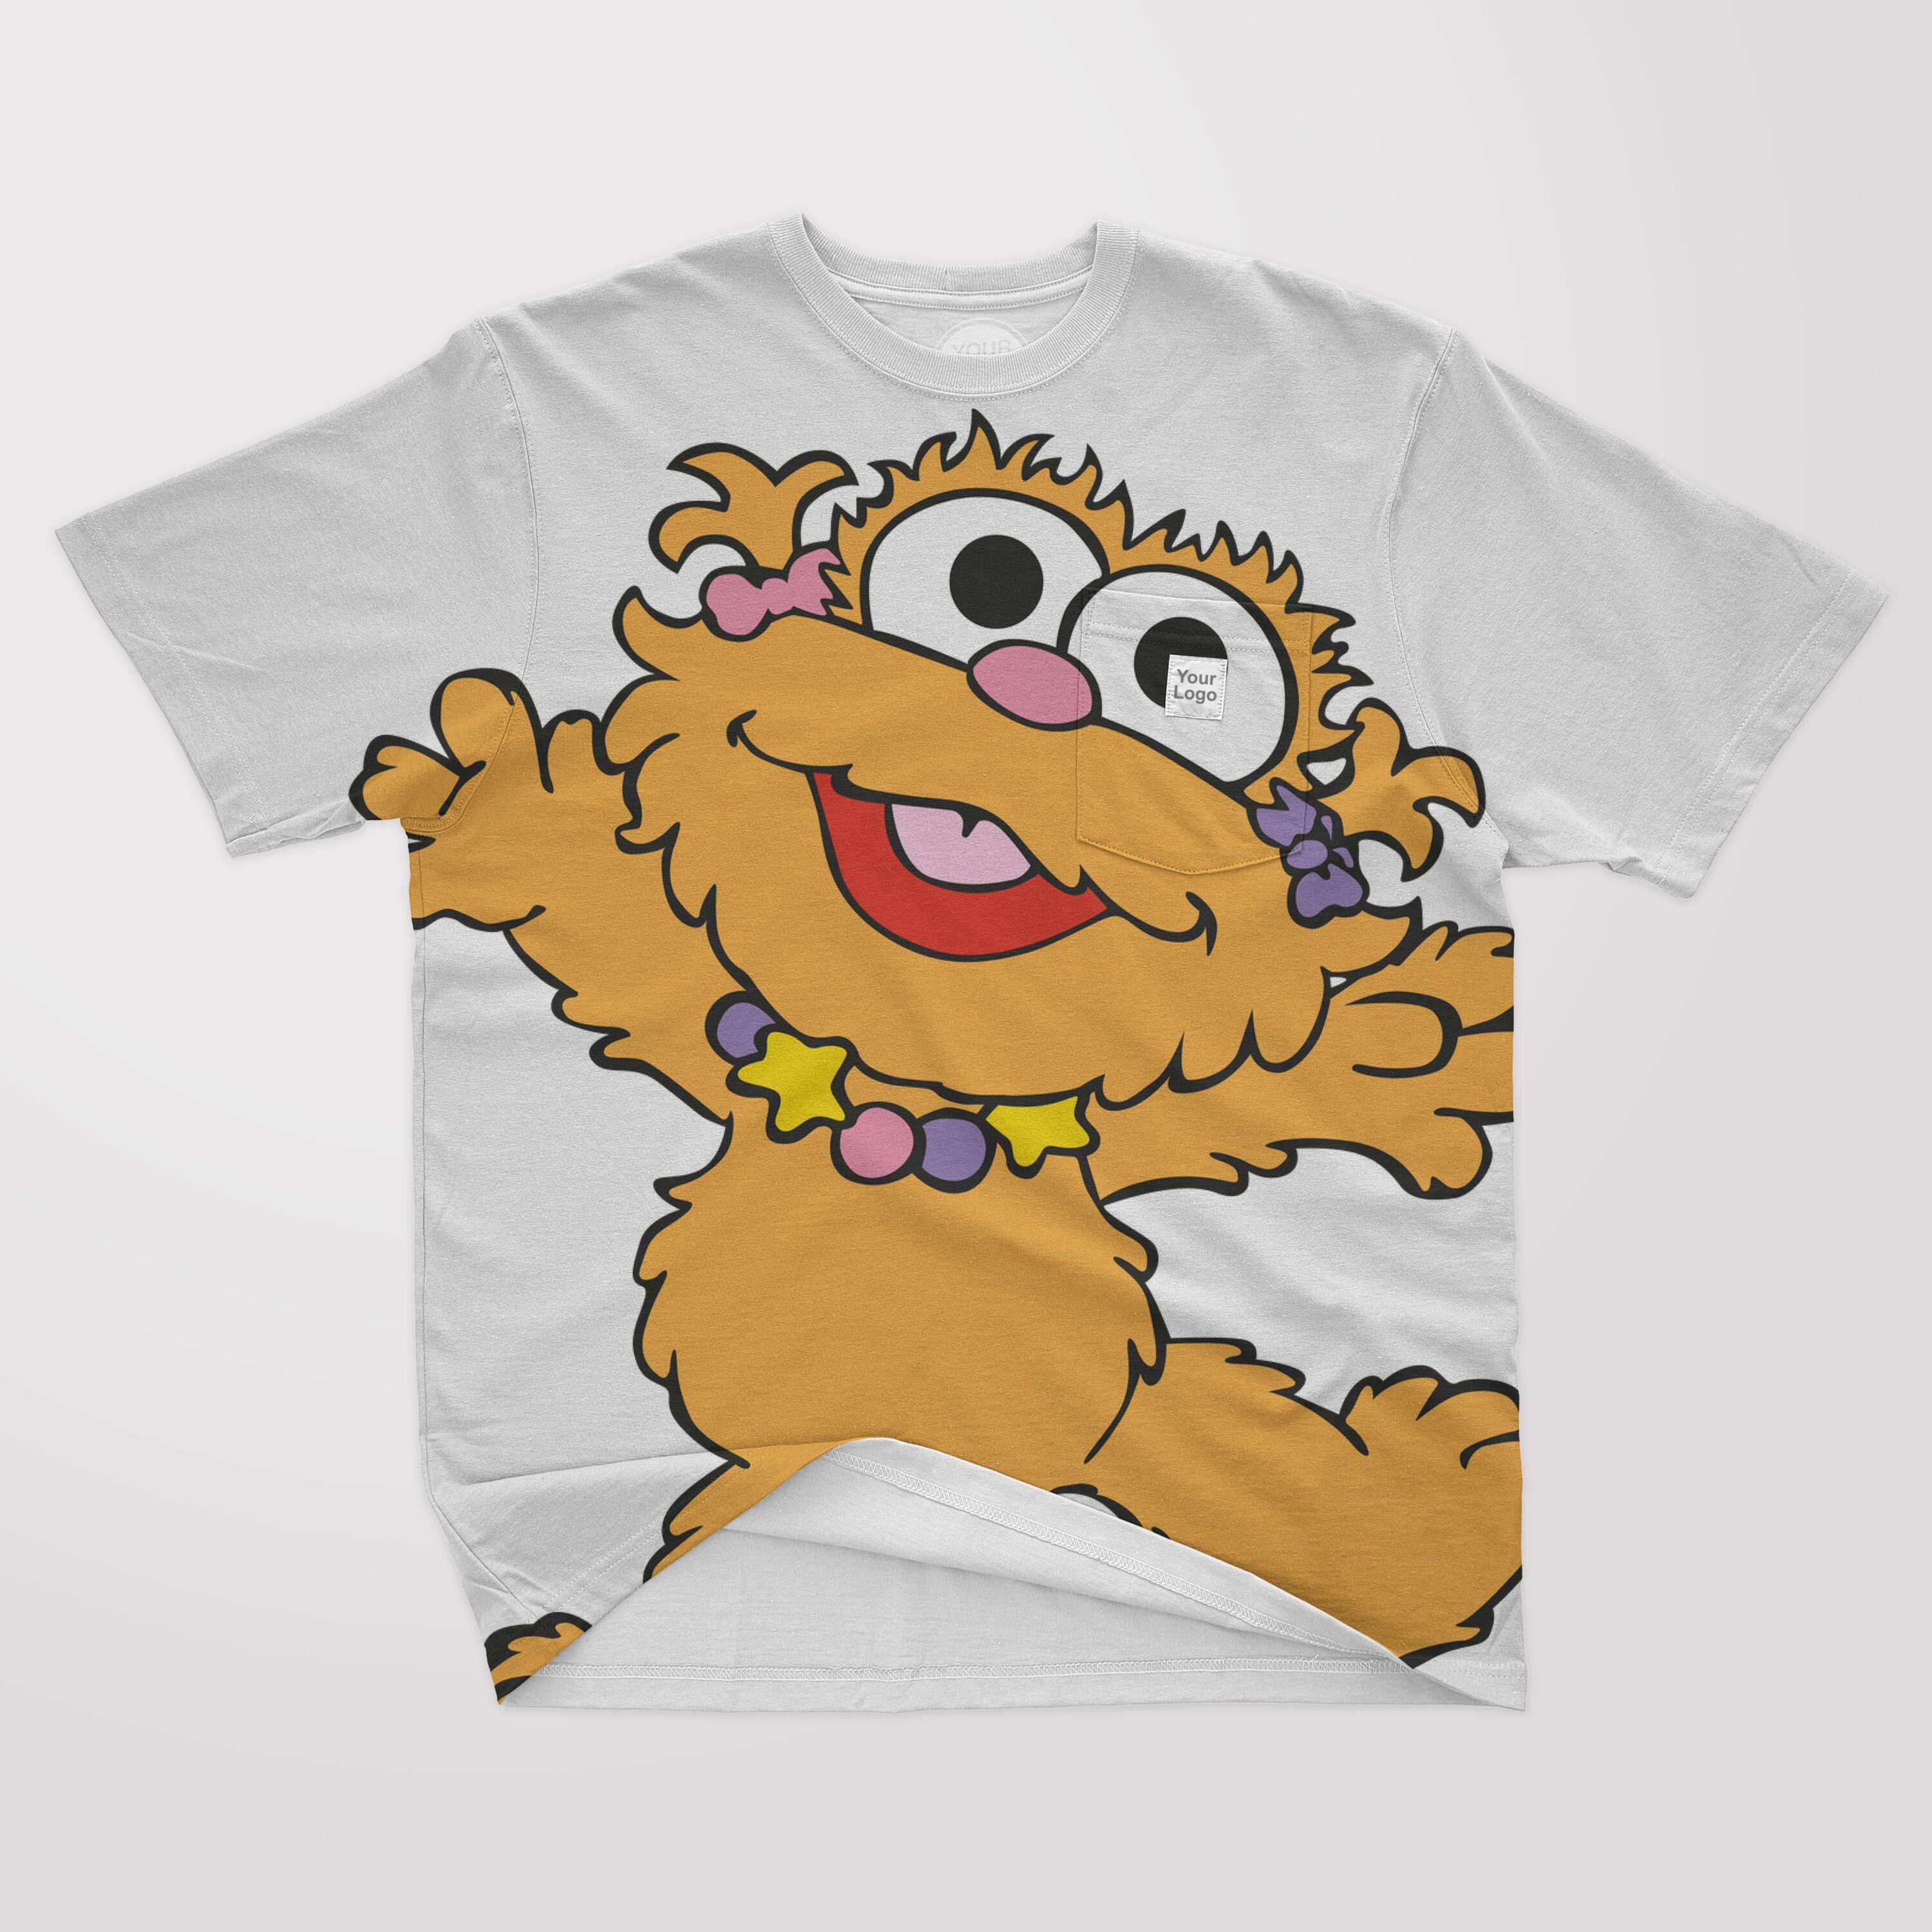 White t-shirt with a picture of a yellow baby Cookie Monster.